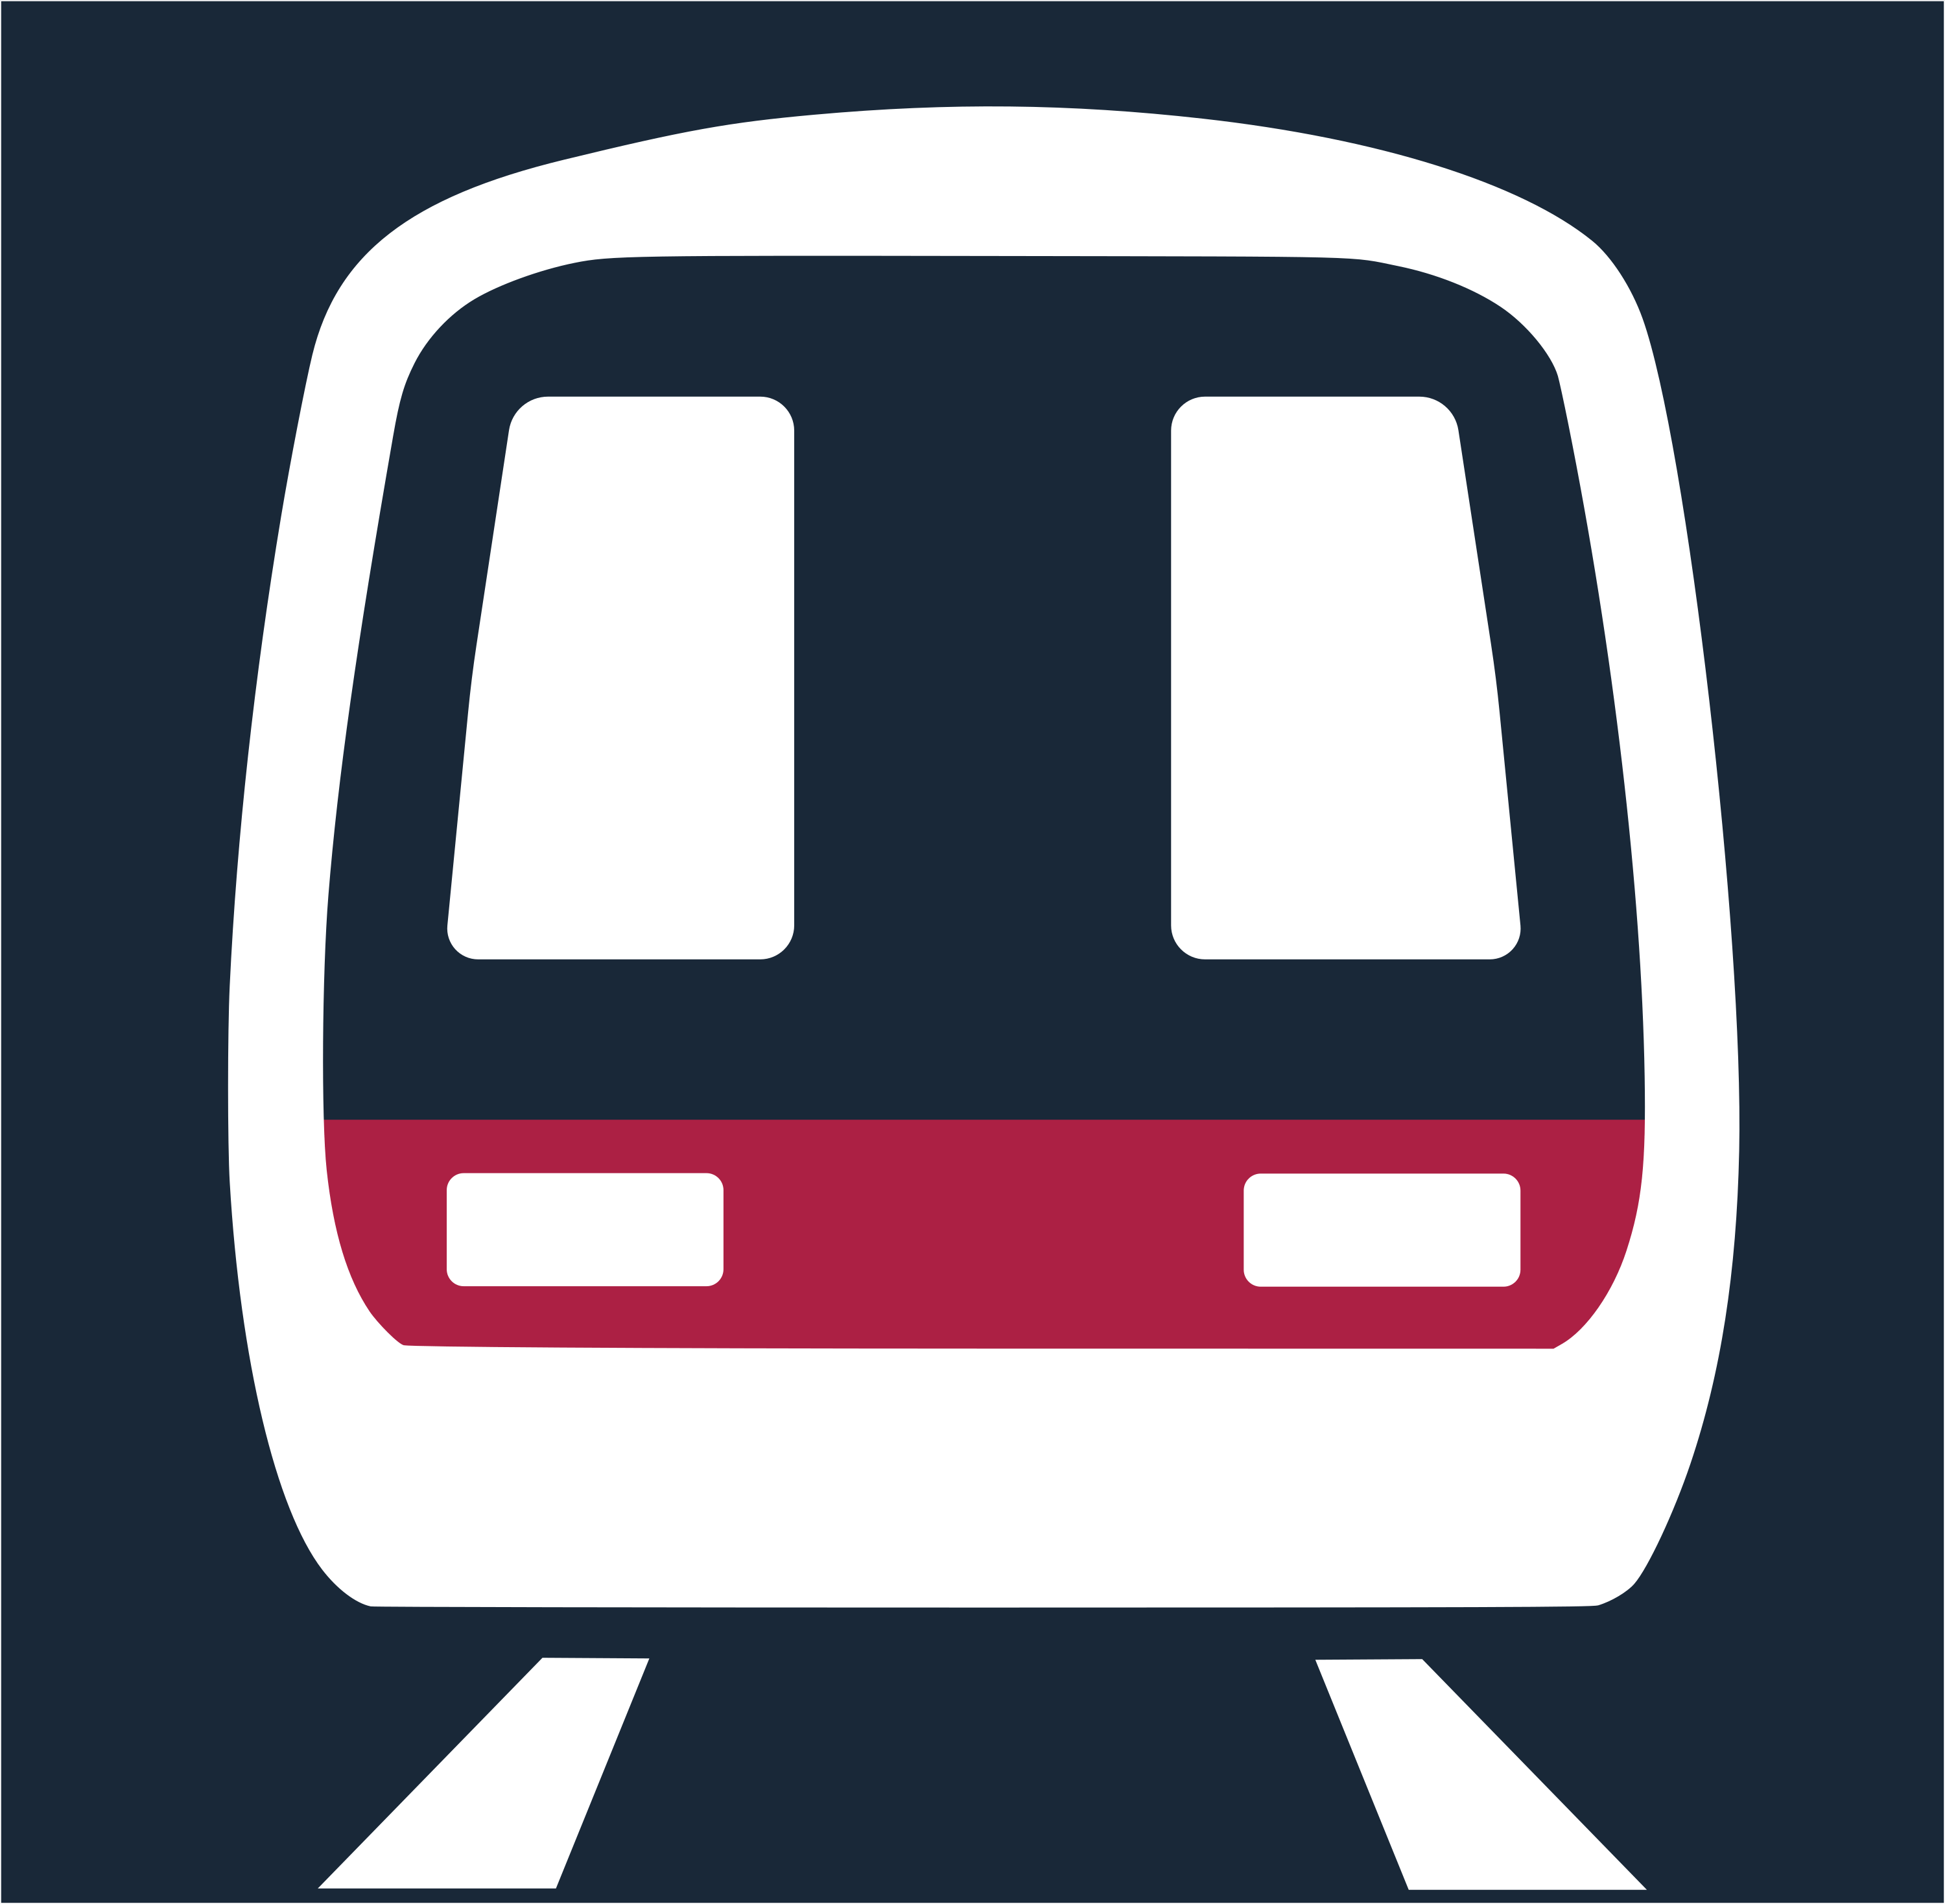 MTR Train logo (With Background)